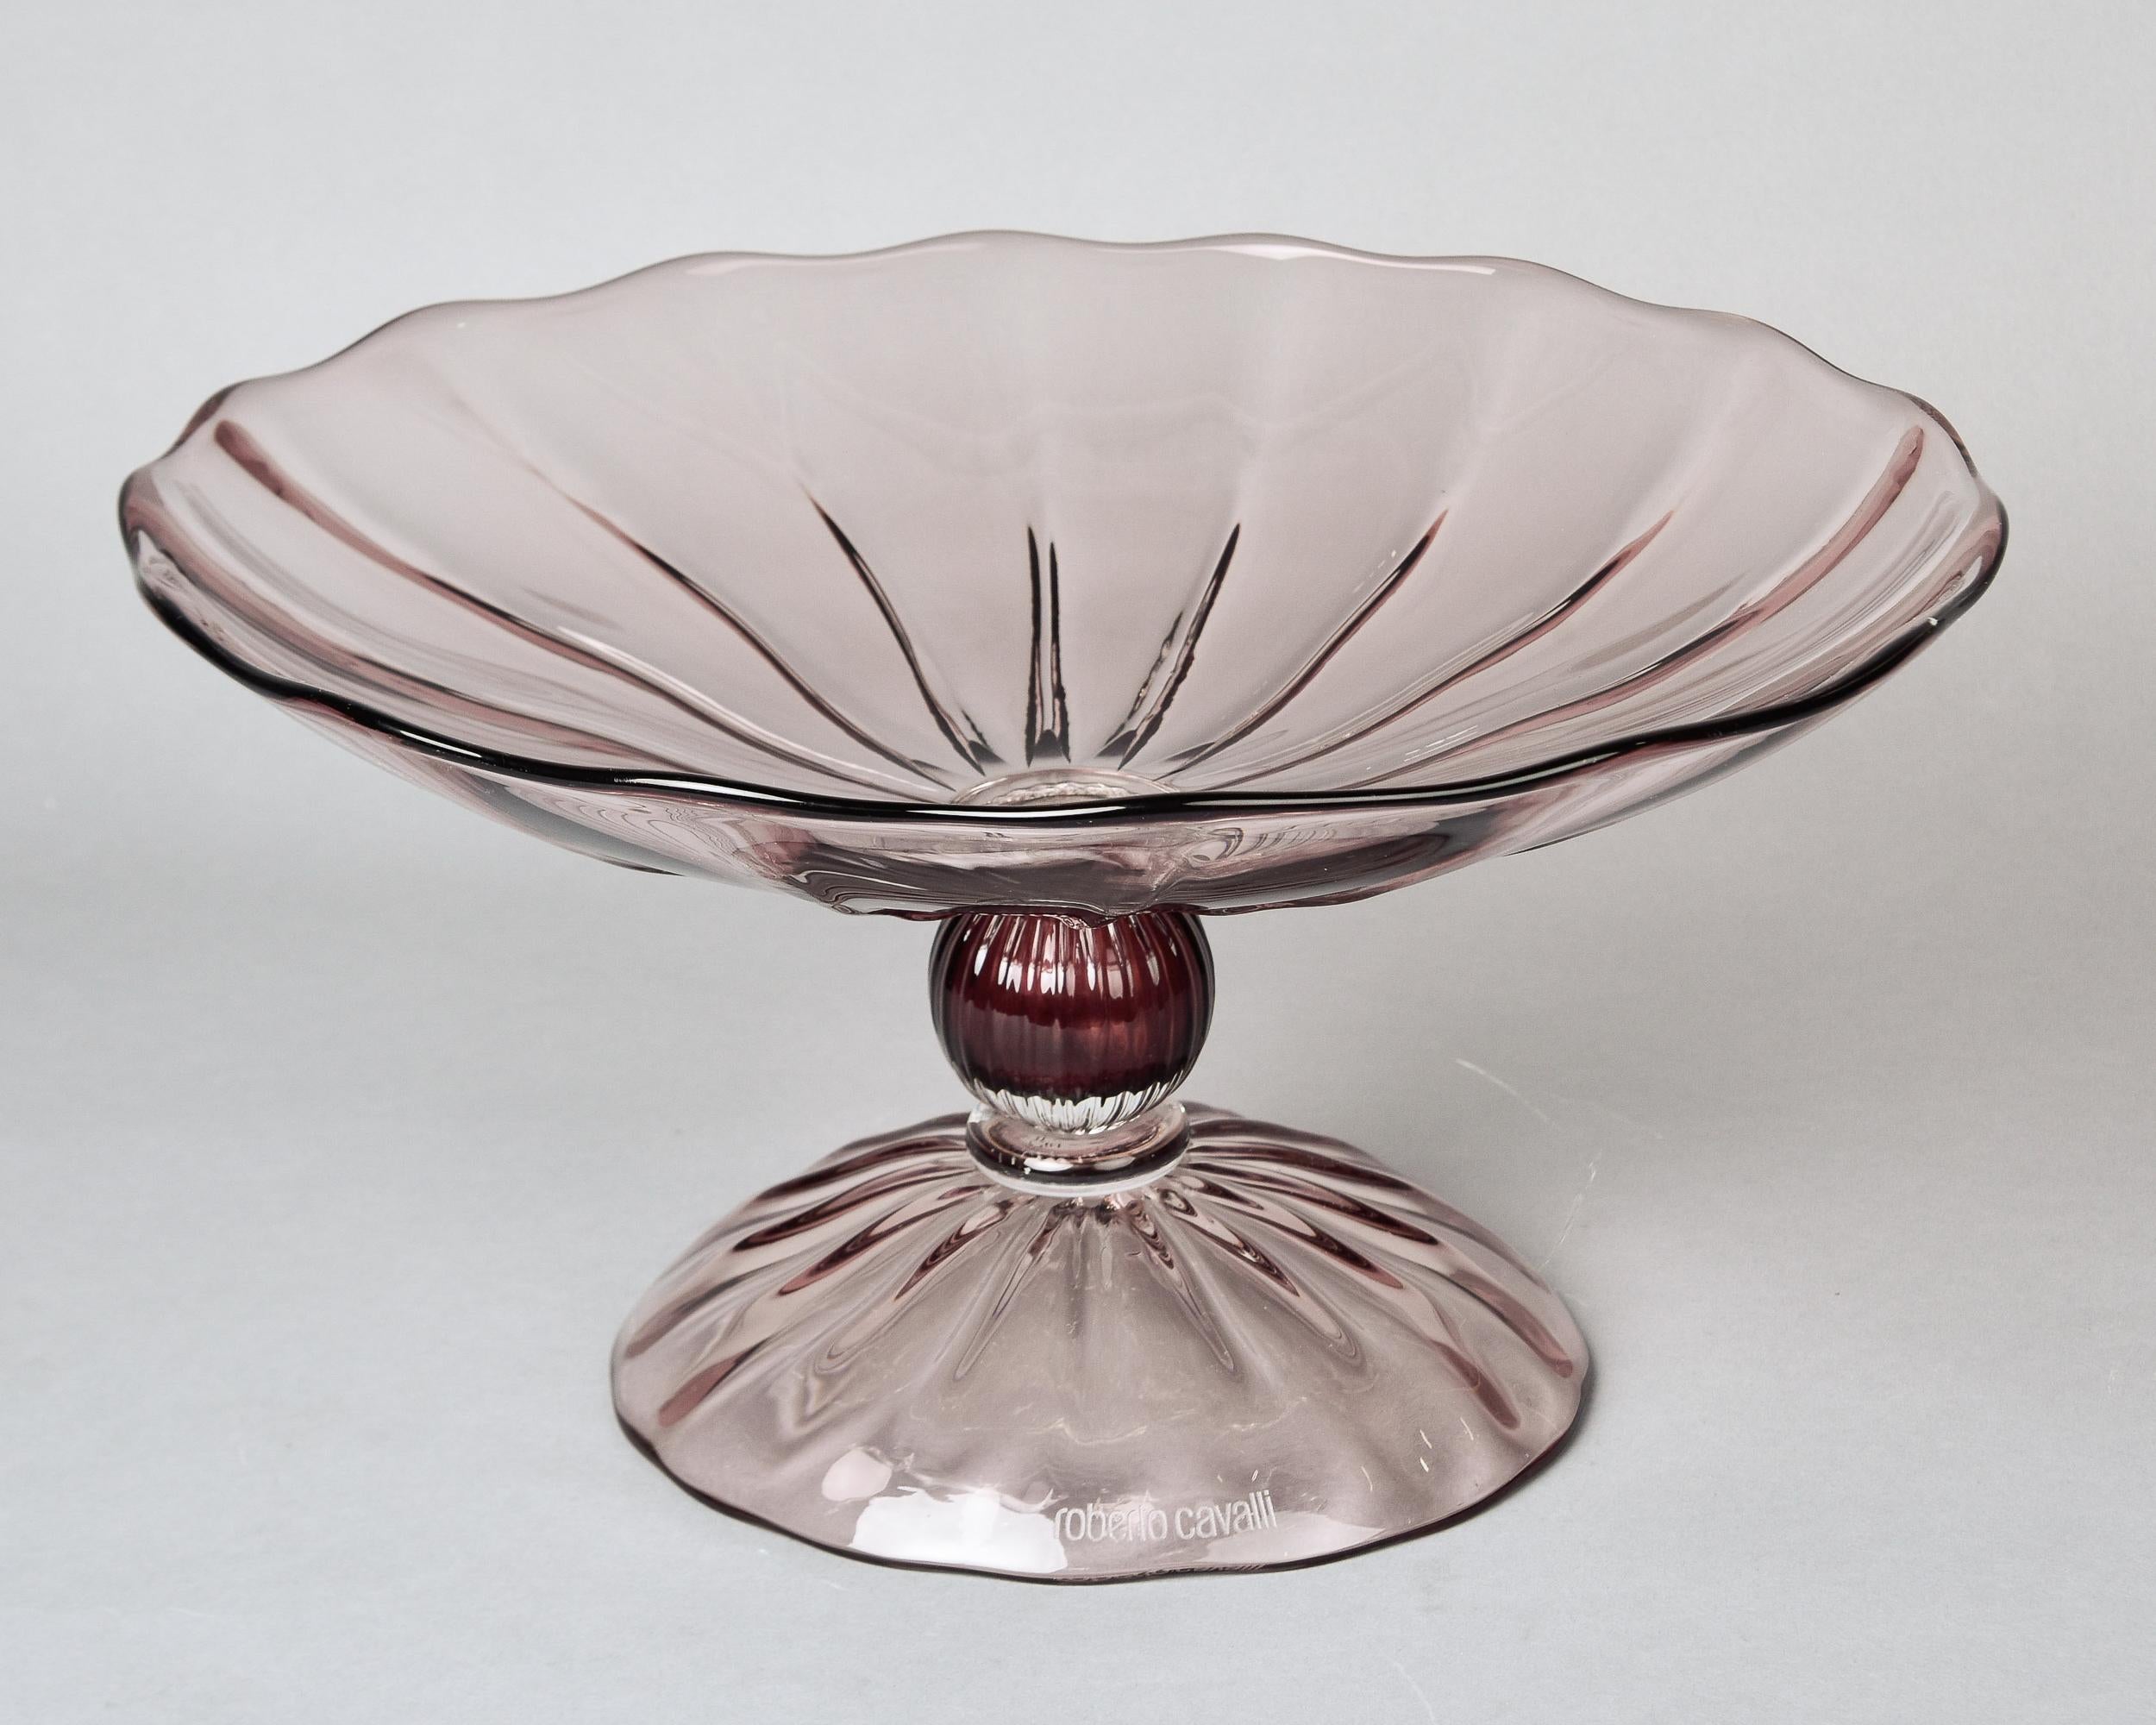 Contemporary Large Vintage Signed Roberto Cavalli Pale Amethyst Glass Tazza or Pedestal Bowl For Sale